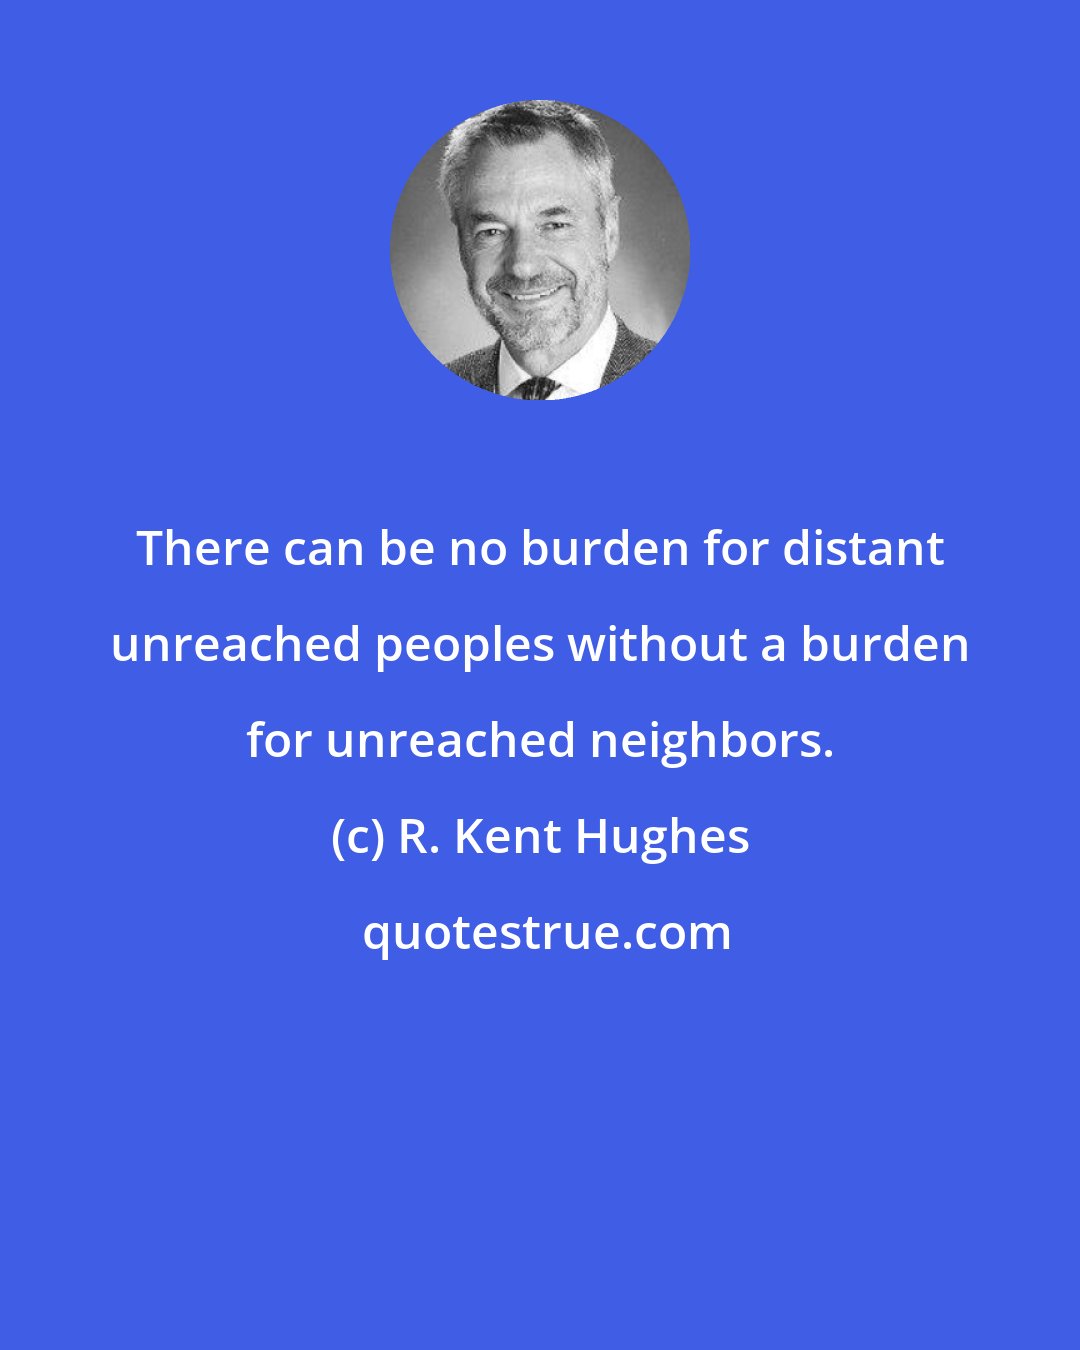 R. Kent Hughes: There can be no burden for distant unreached peoples without a burden for unreached neighbors.